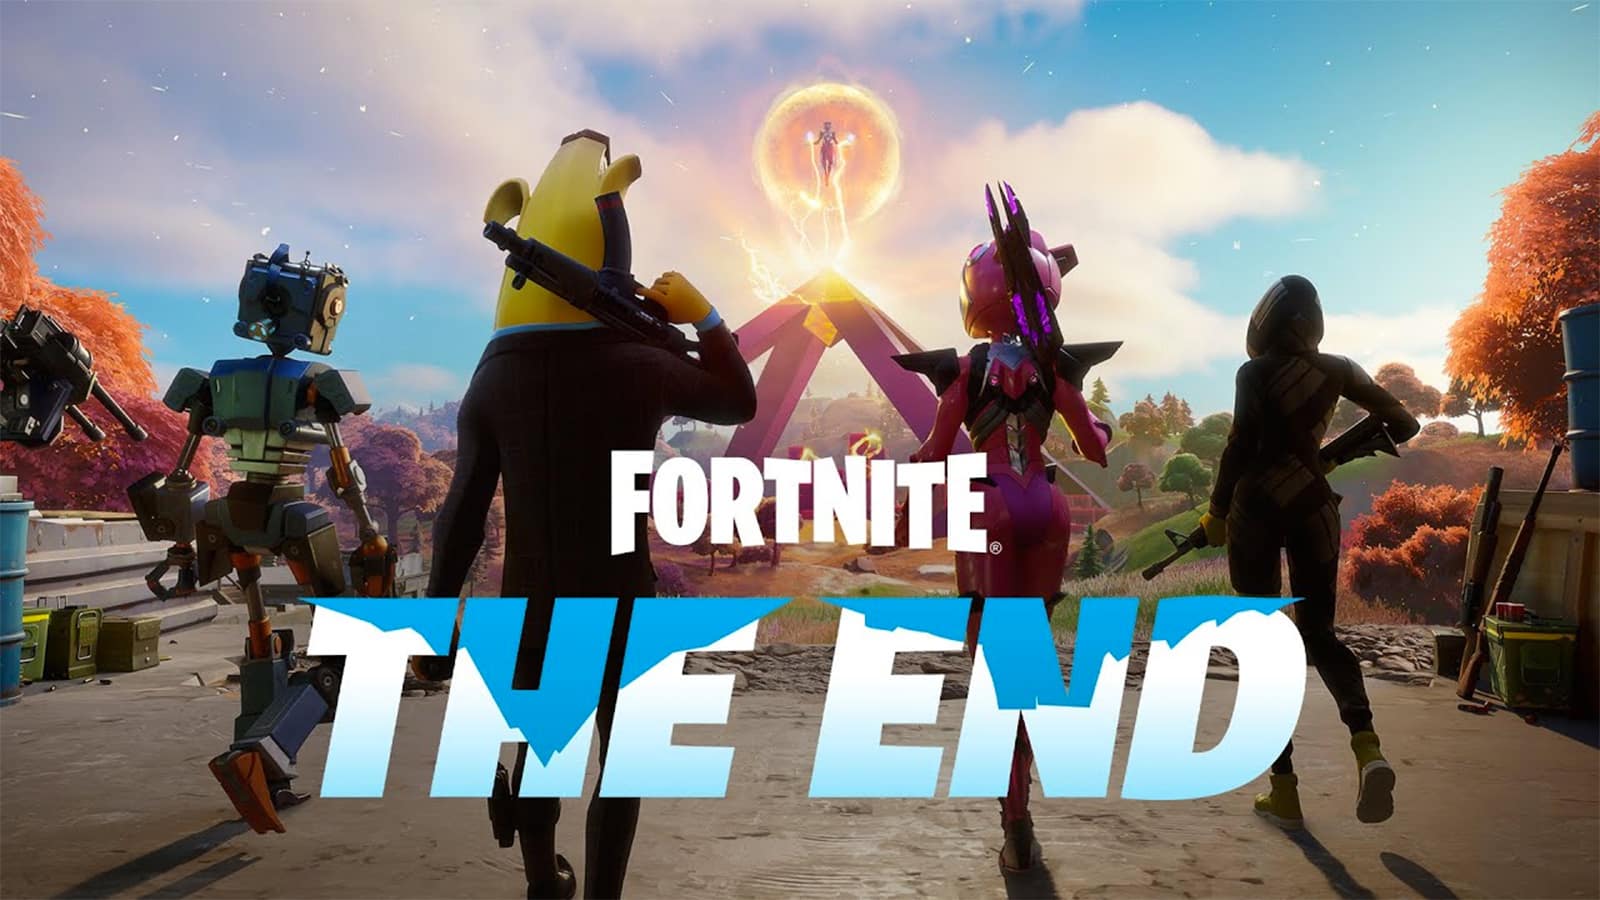 A loading screen teasing the end of Chapter 2 and the beginning of Fortnite Chapter 3